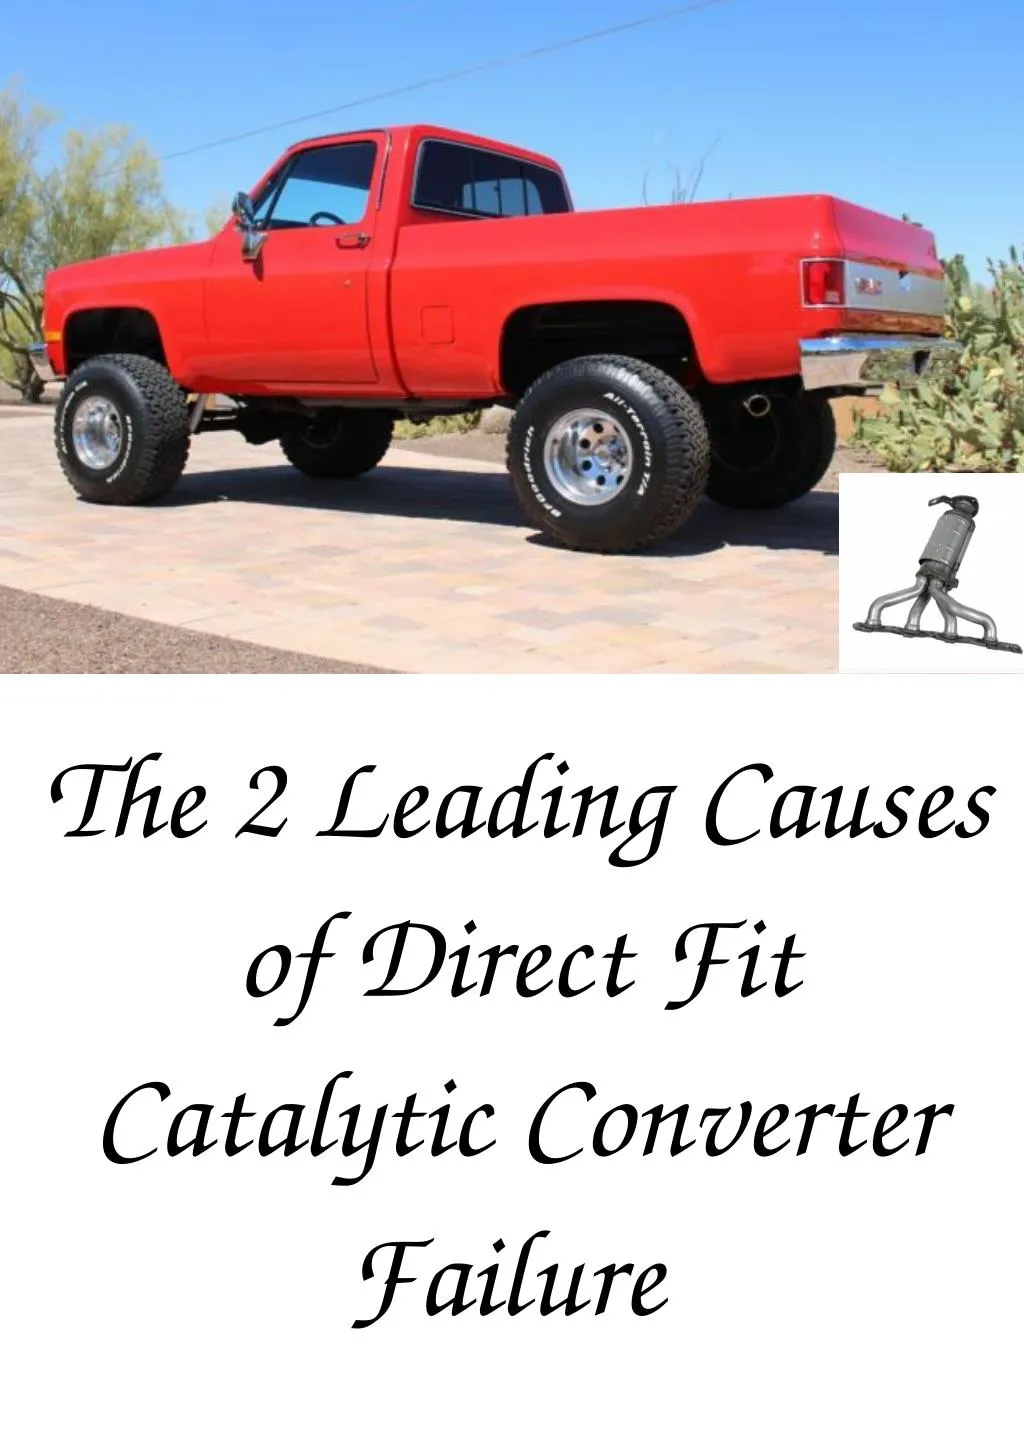 the 2 leading causes of direct fit catalytic